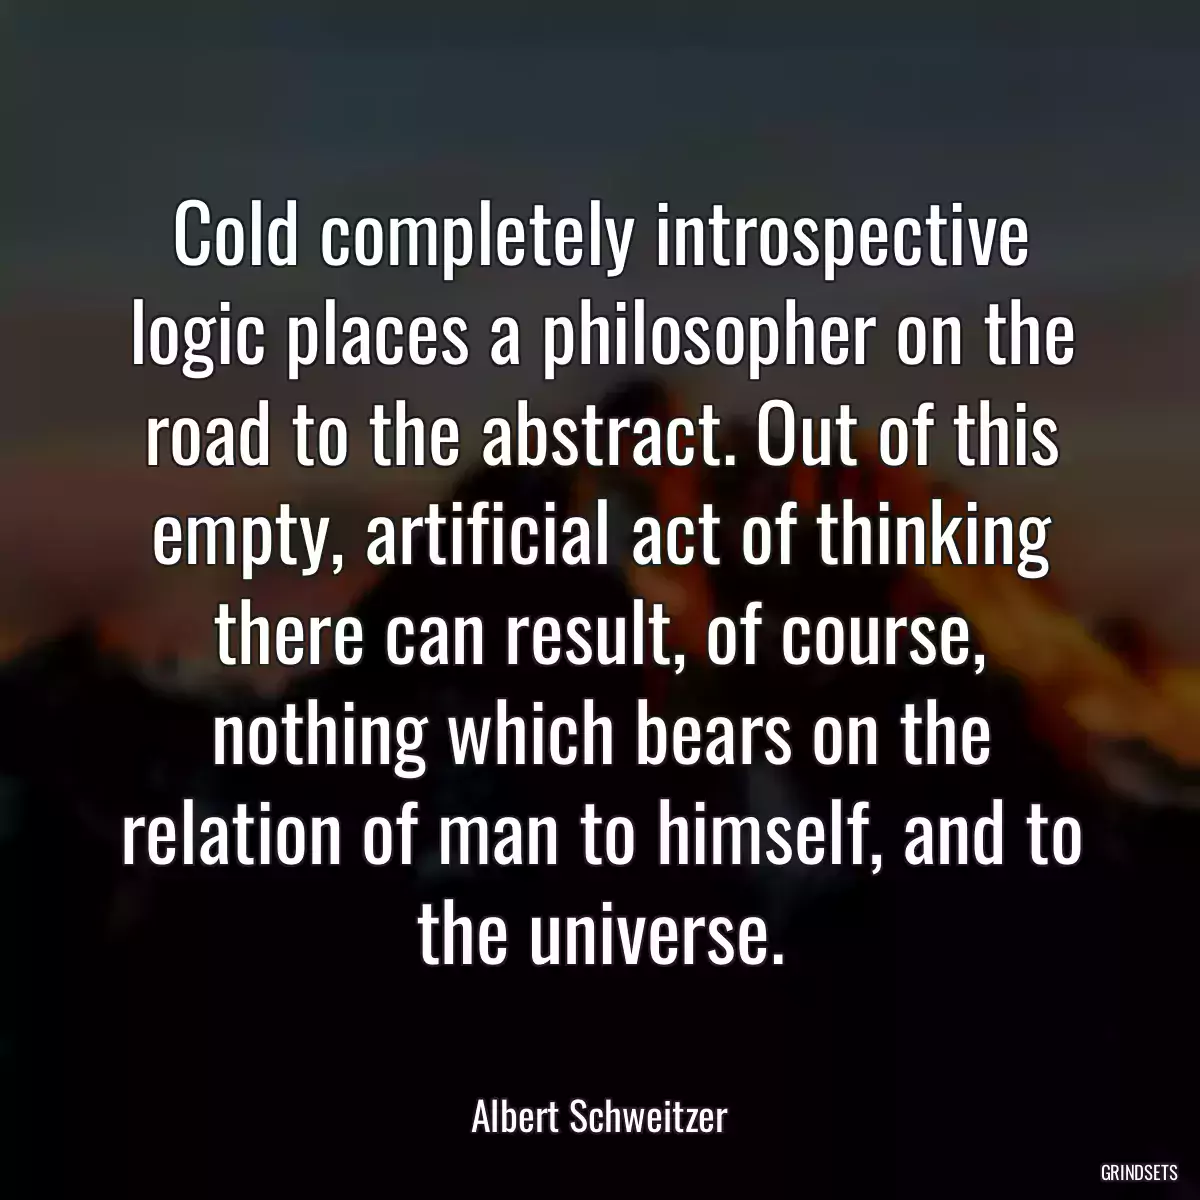 Cold completely introspective logic places a philosopher on the road to the abstract. Out of this empty, artificial act of thinking there can result, of course, nothing which bears on the relation of man to himself, and to the universe.